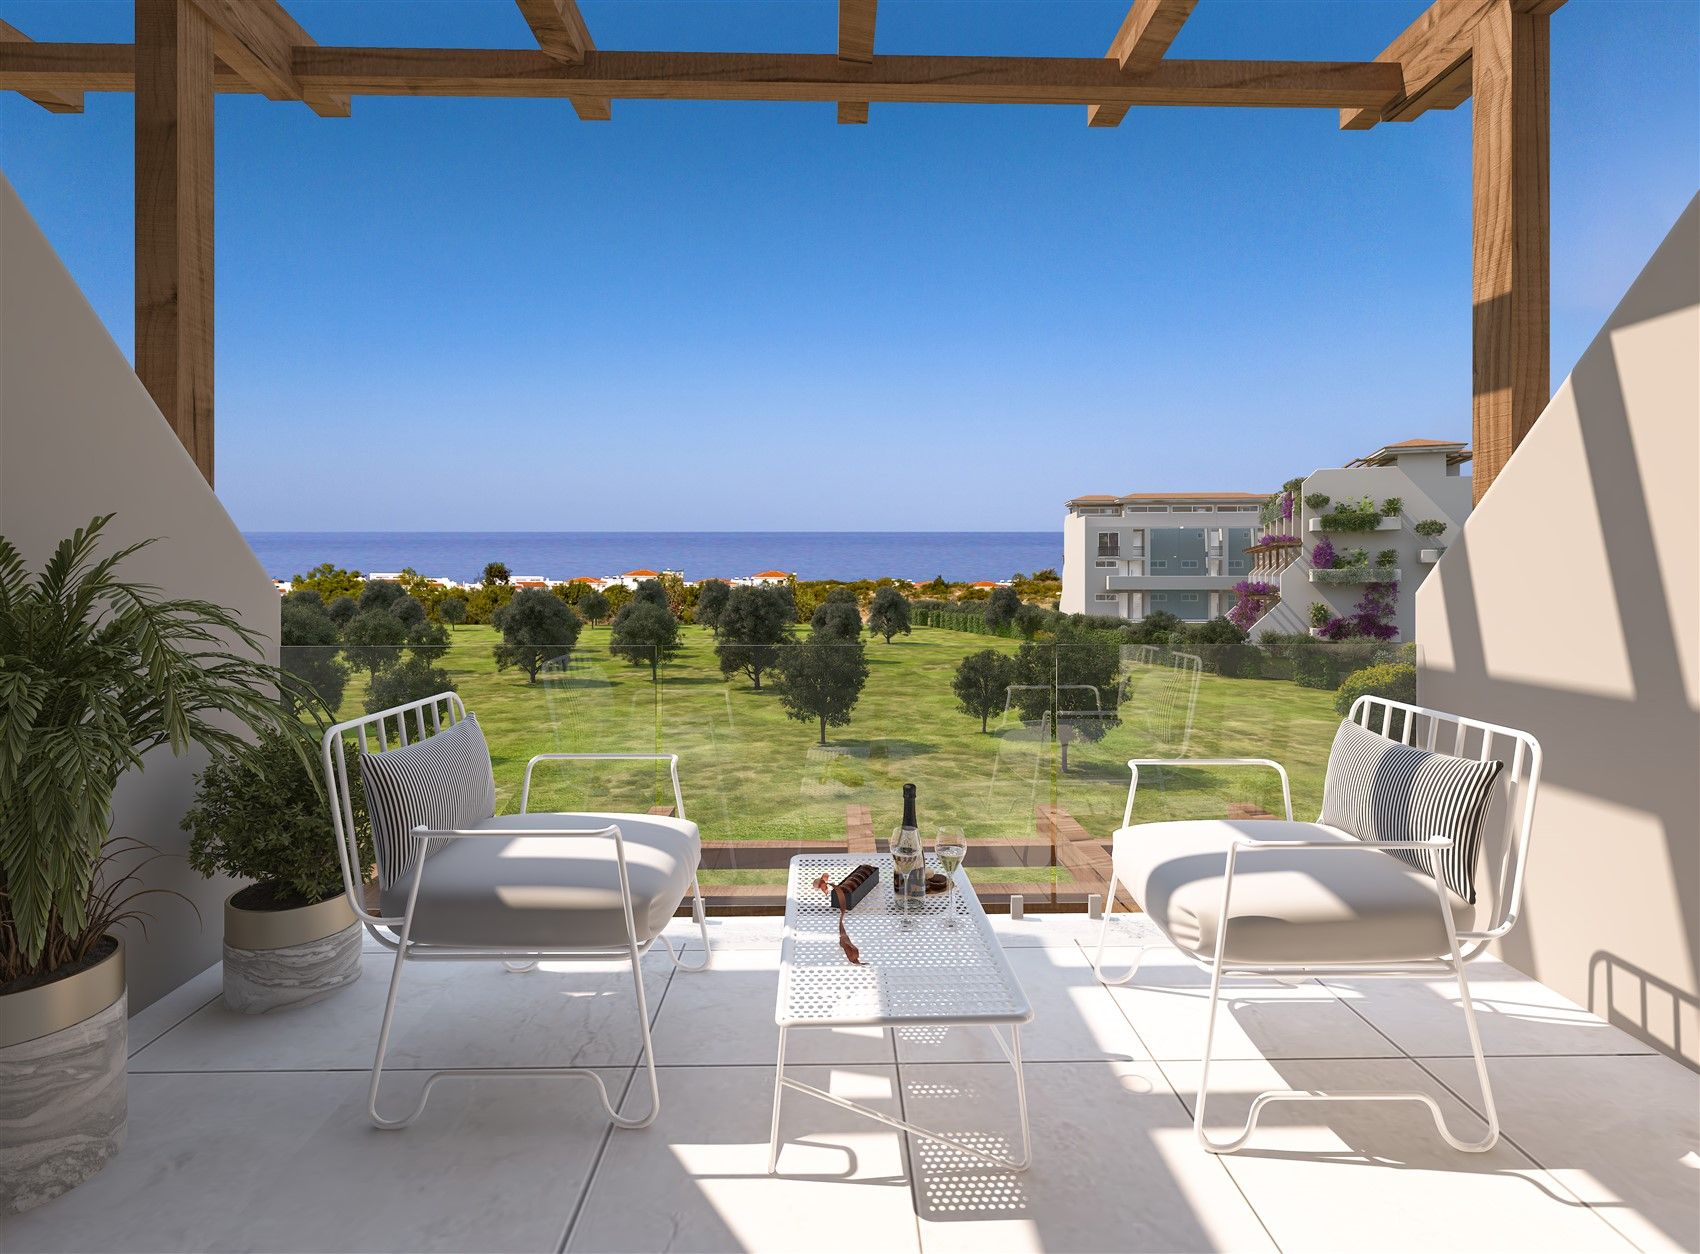 The residential project on a sea coast in the picturesque area of Esentepe